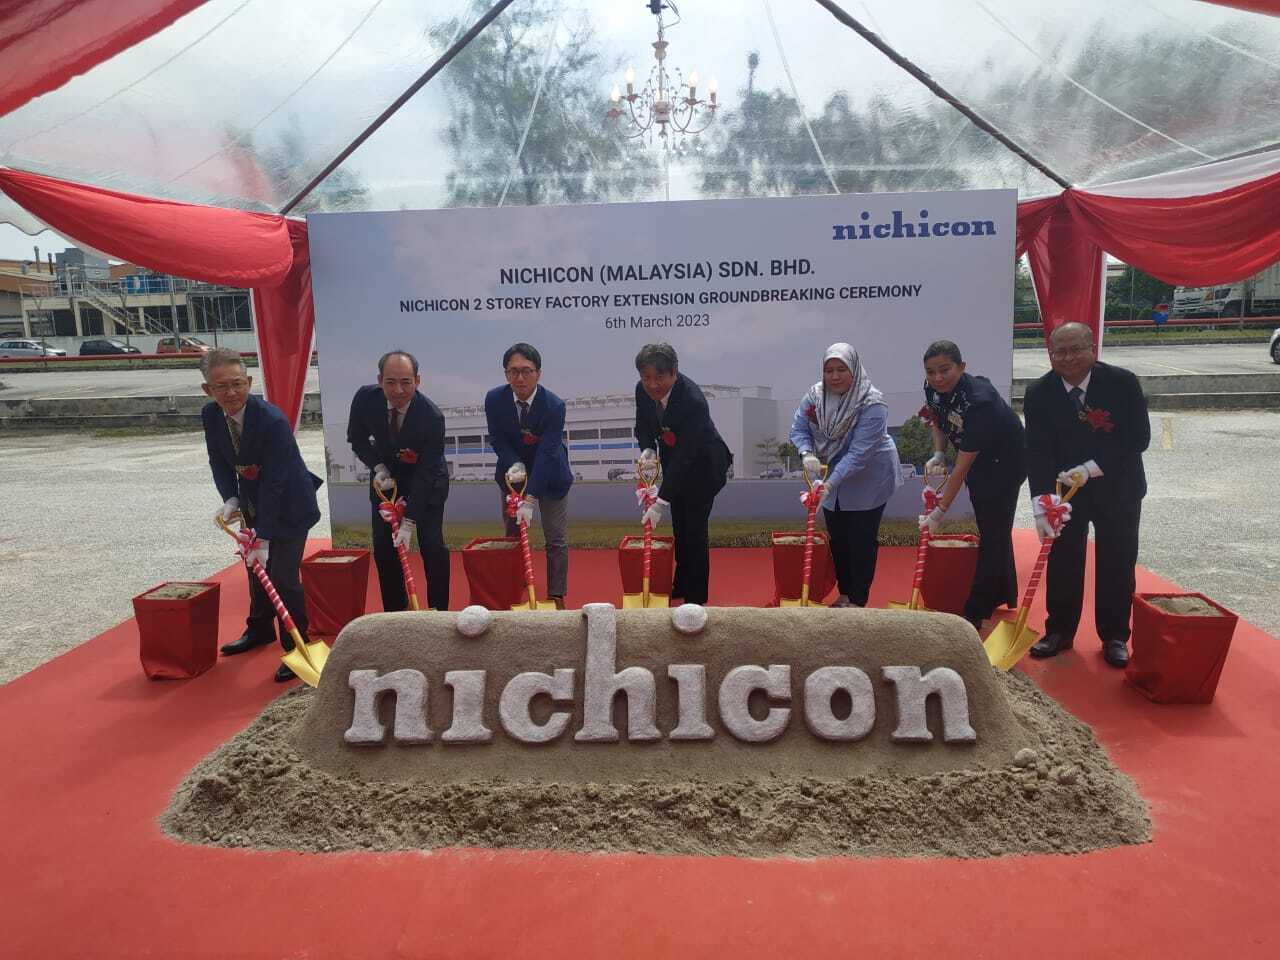 6 March 2023 – Nichicon (Malaysia) Sdn Bhd New 2 Storey Factory Expansion Project